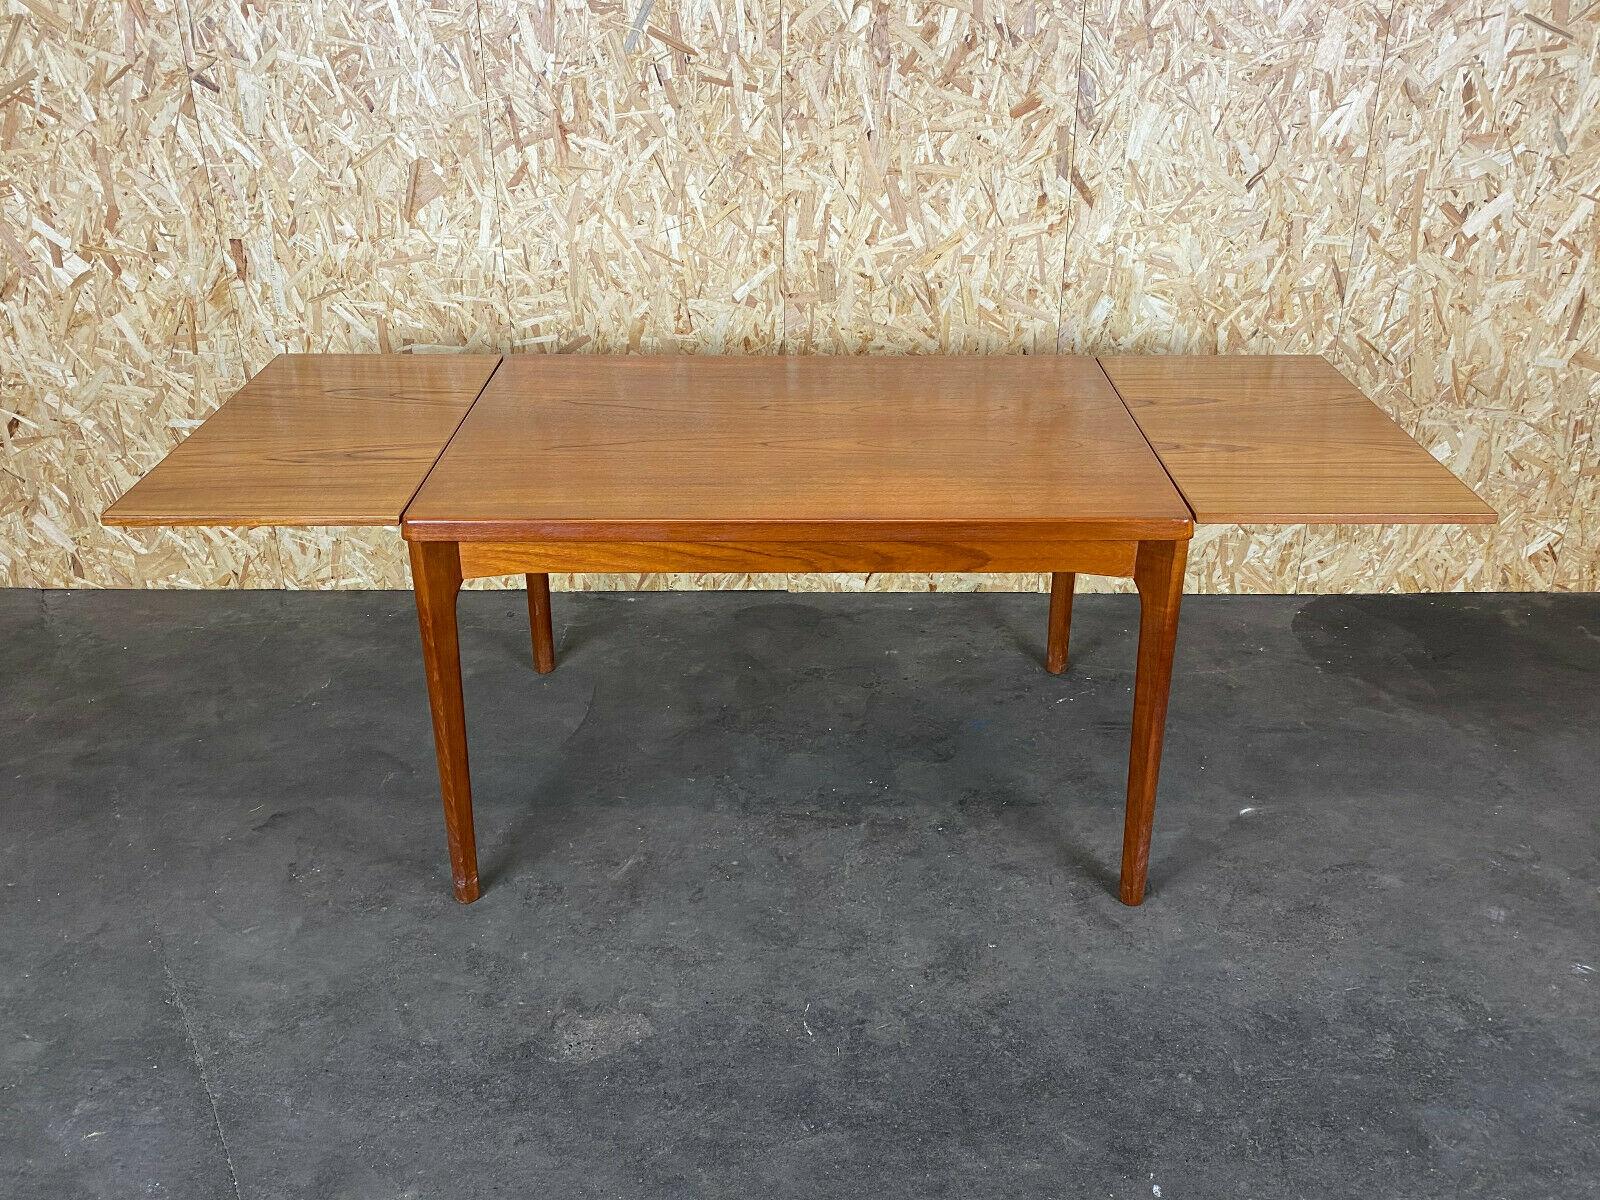 60s 70s teak dining table Dining Table Henning Kjaernulf Danish Design 70s

Object: dining table

Manufacturer: Vejle

Condition: good

Age: around 1960-1970

Dimensions:

120cm (+ 2x 45cm) x 85cm x 73cm

Other notes:

The pictures